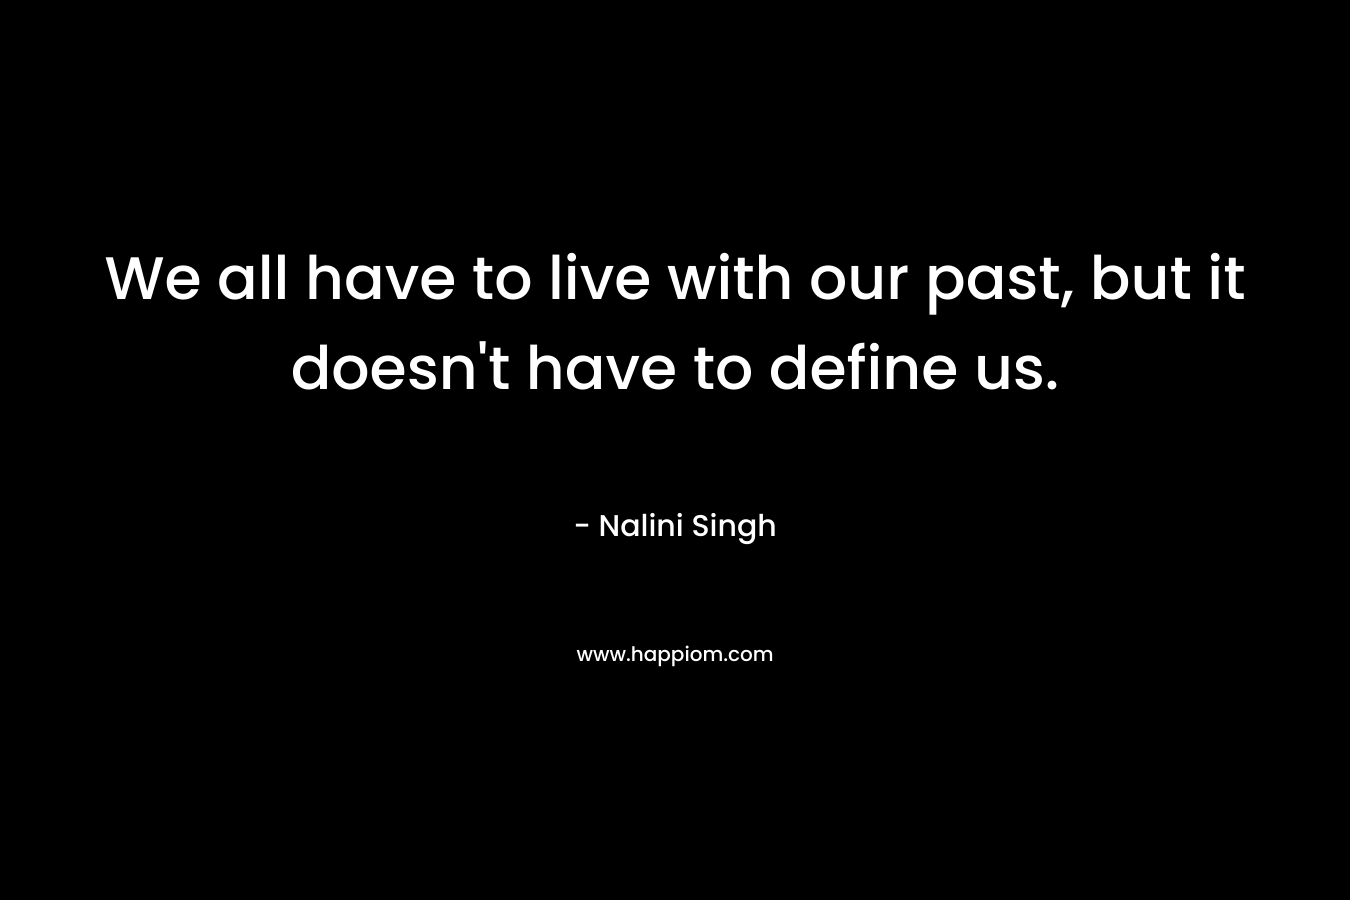 We all have to live with our past, but it doesn't have to define us.